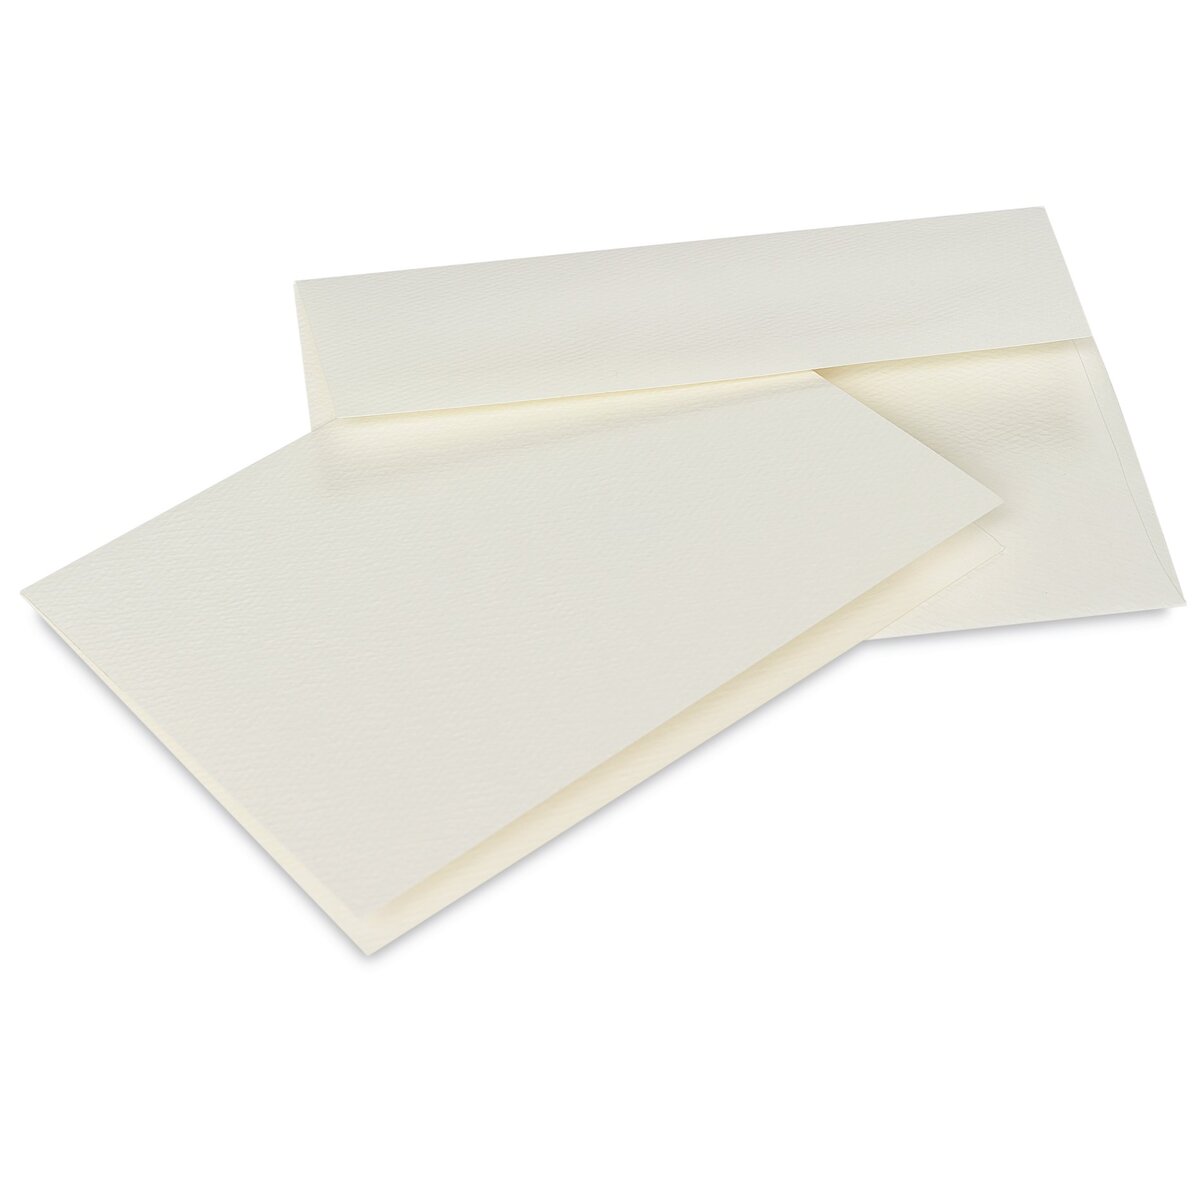 Strathmore Creative Cards and Envelopes - Palm Beach White (No Deckle),  Full Size, 50 Pack